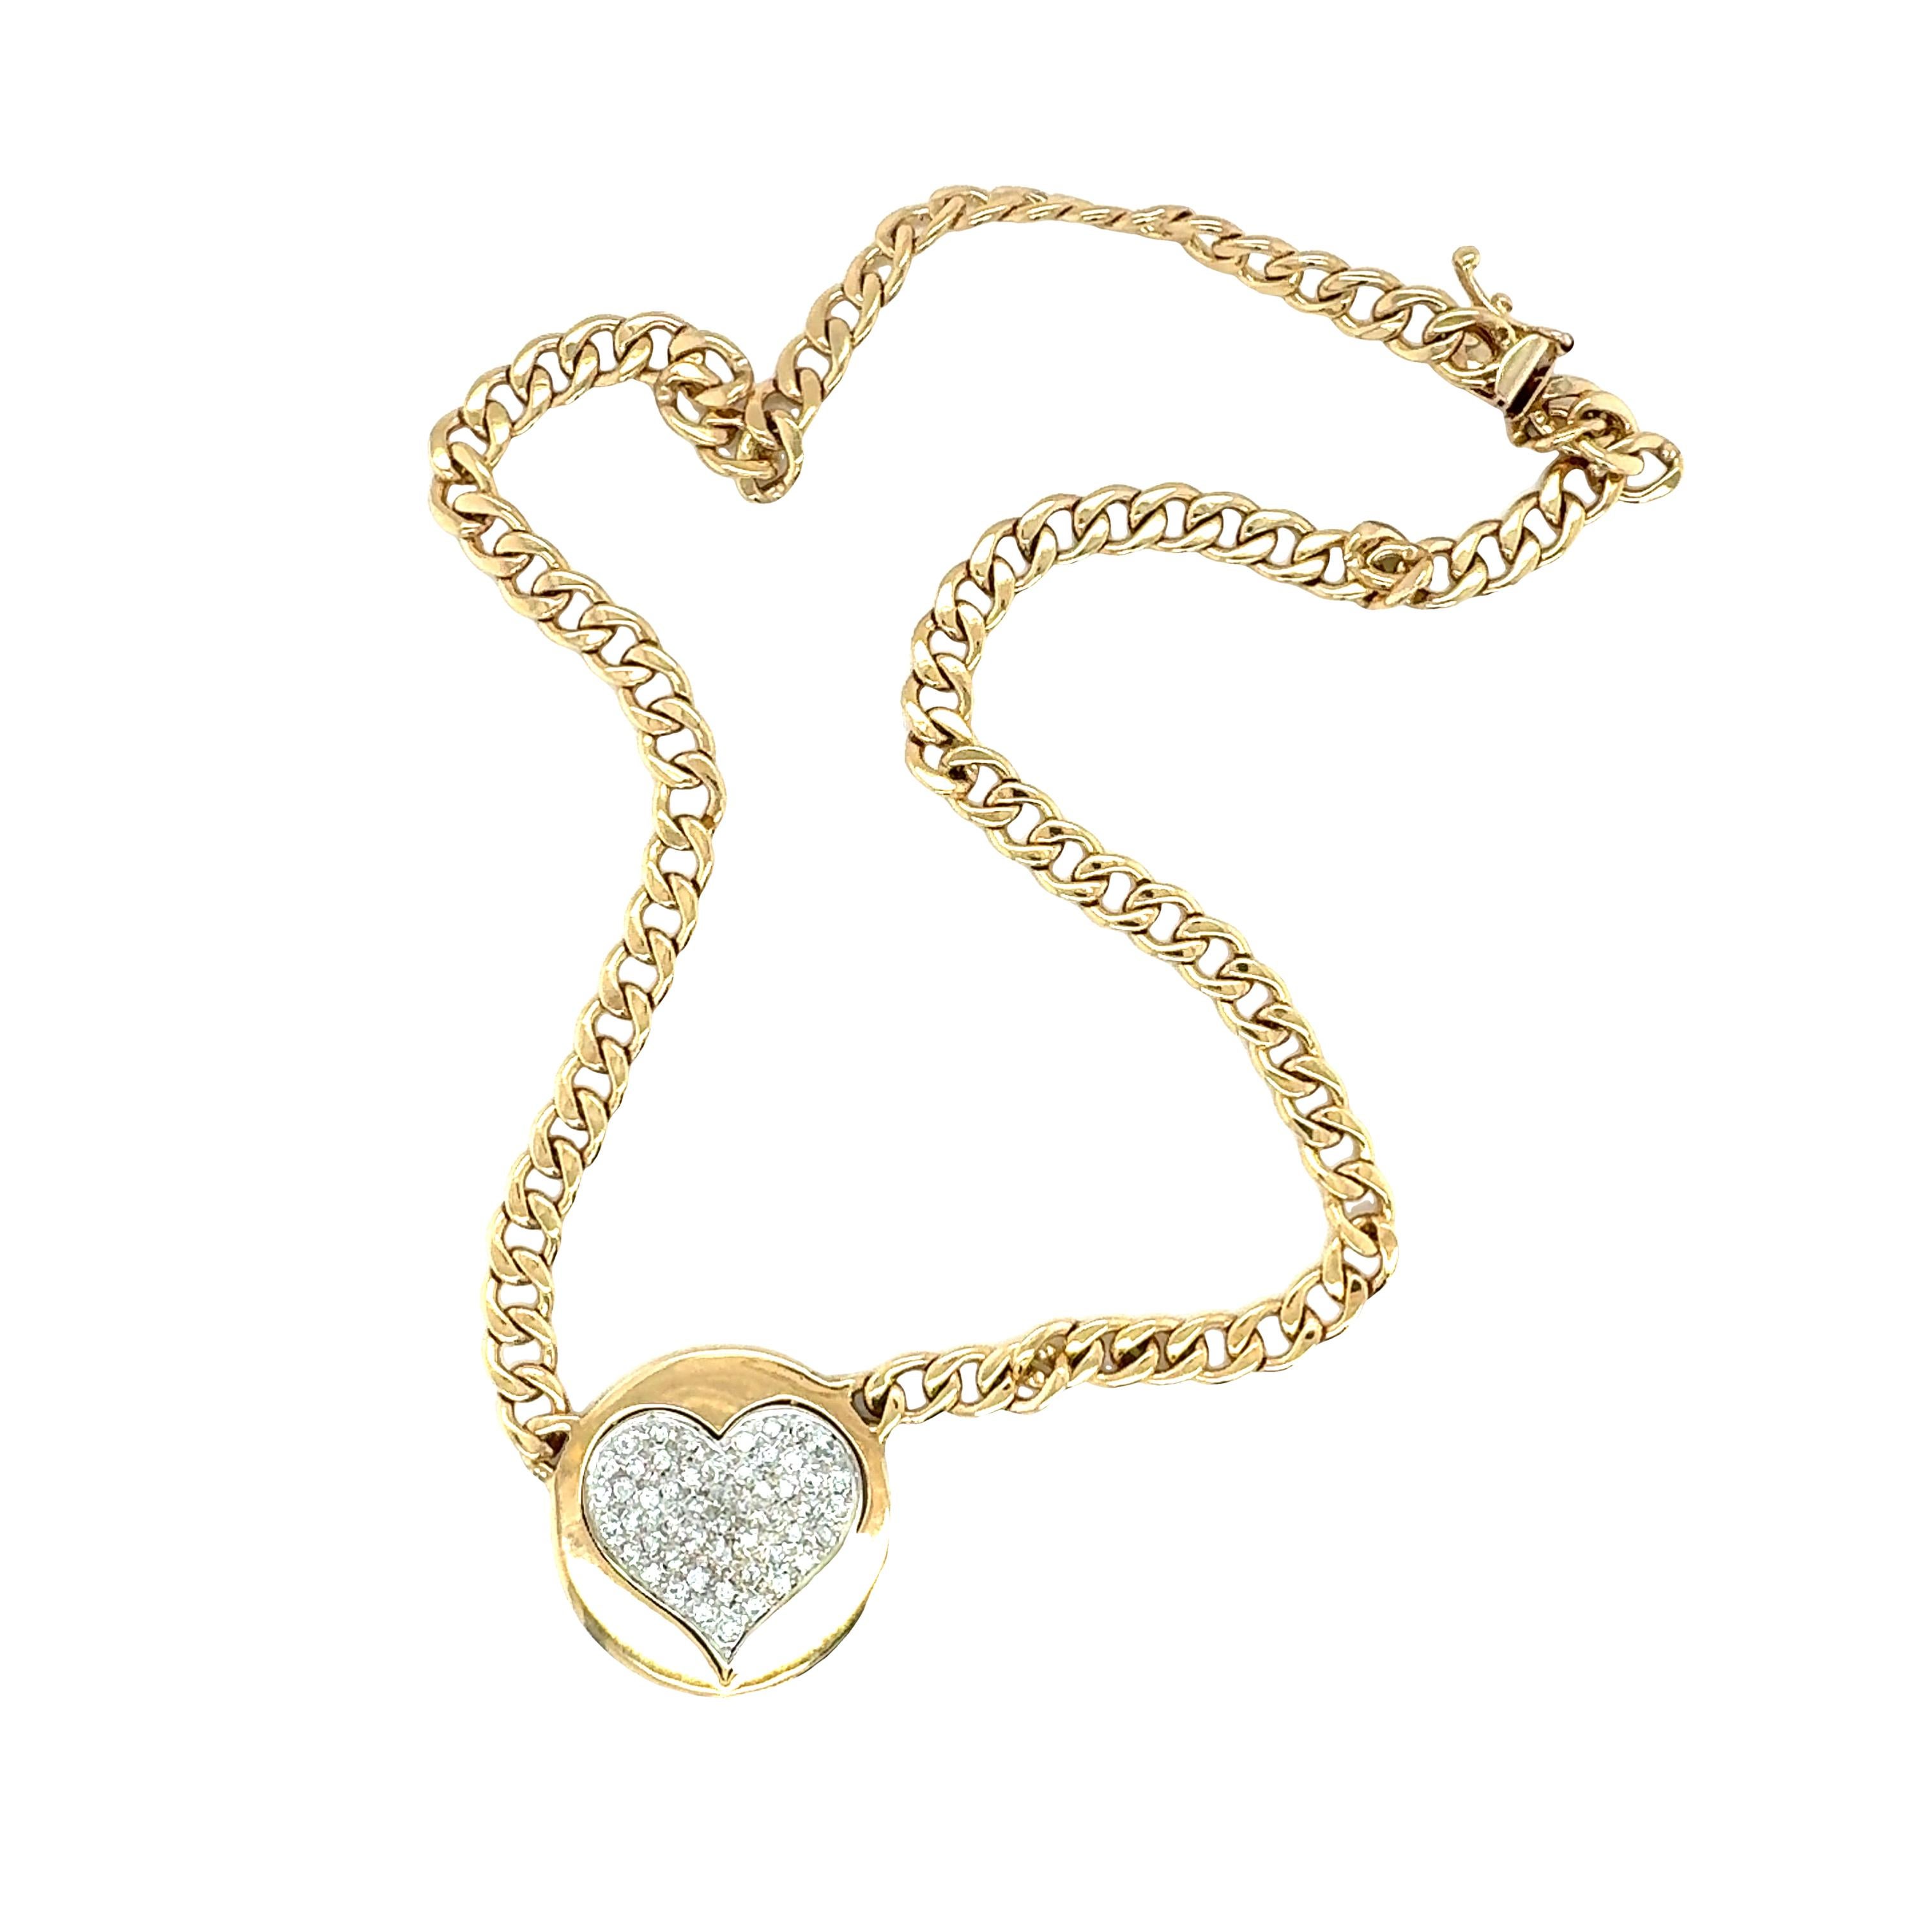 One circular diamond heart pendant in 14K yellow gold featuring 52 pave set, round brilliant cut diamonds totaling 0.81 ct. with J-K color and SI-1, SI-2 clarity. Attached to an open curb link chain necklace. Measures 25 millimeters in diameter at